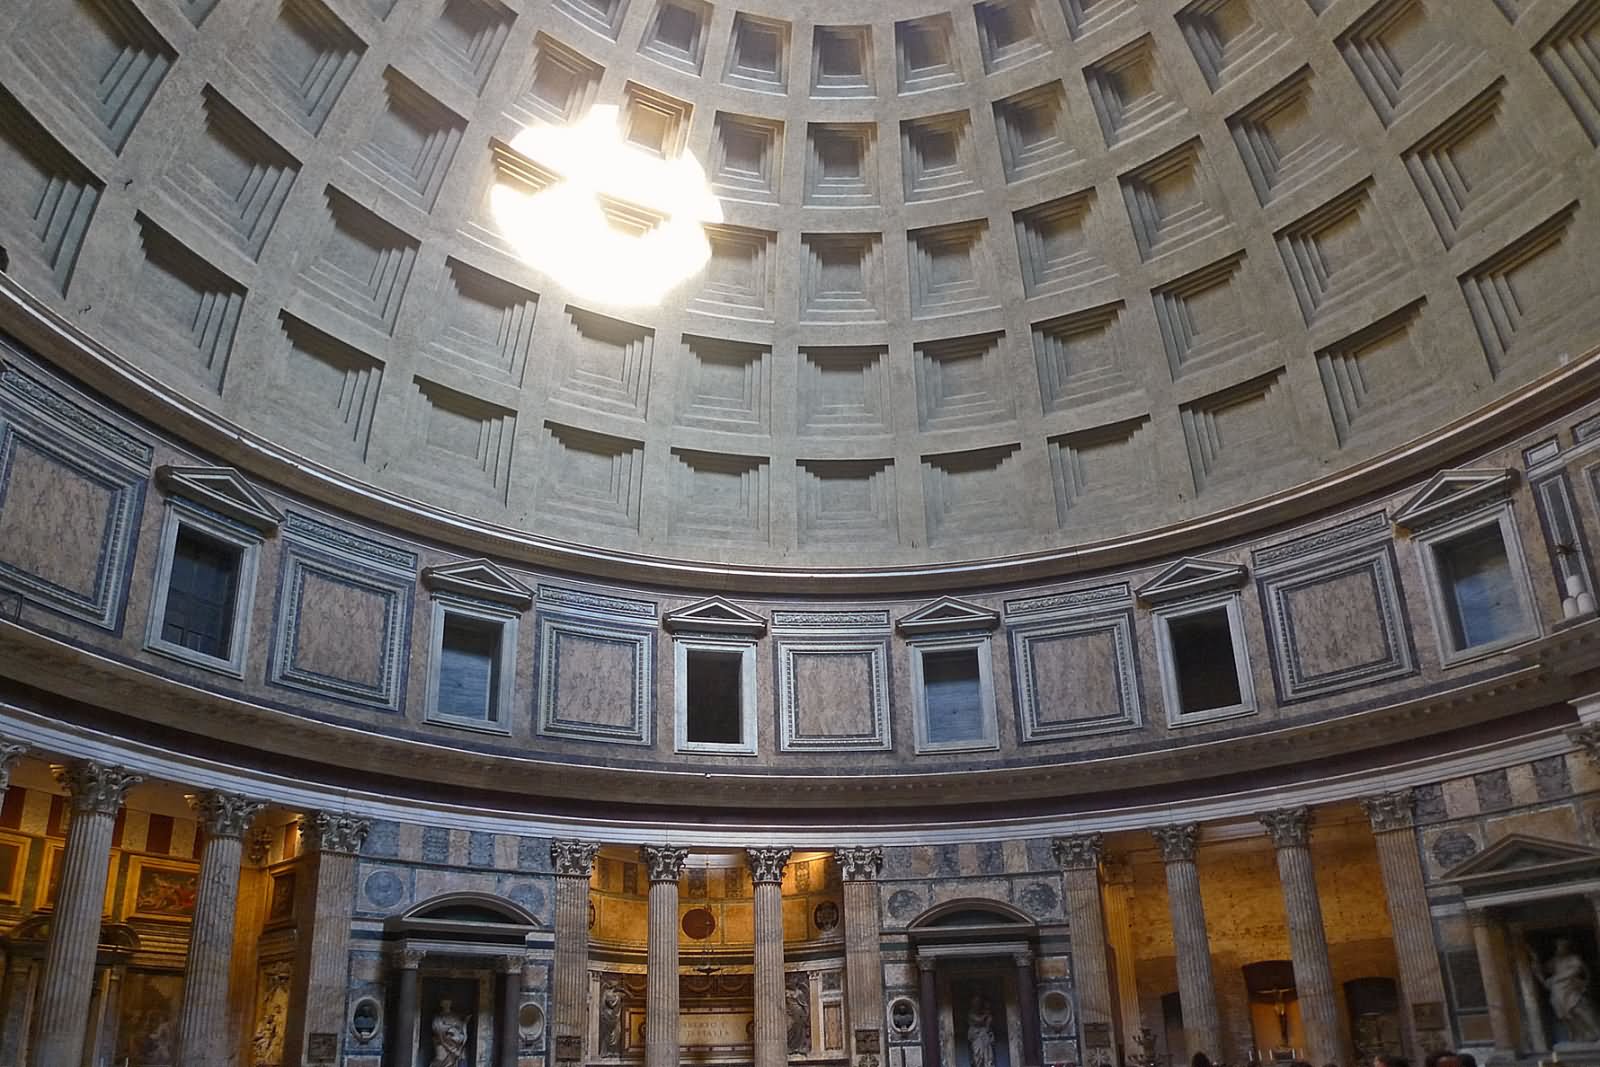 The Extraordinary Inside View Of Pantheon In Rome